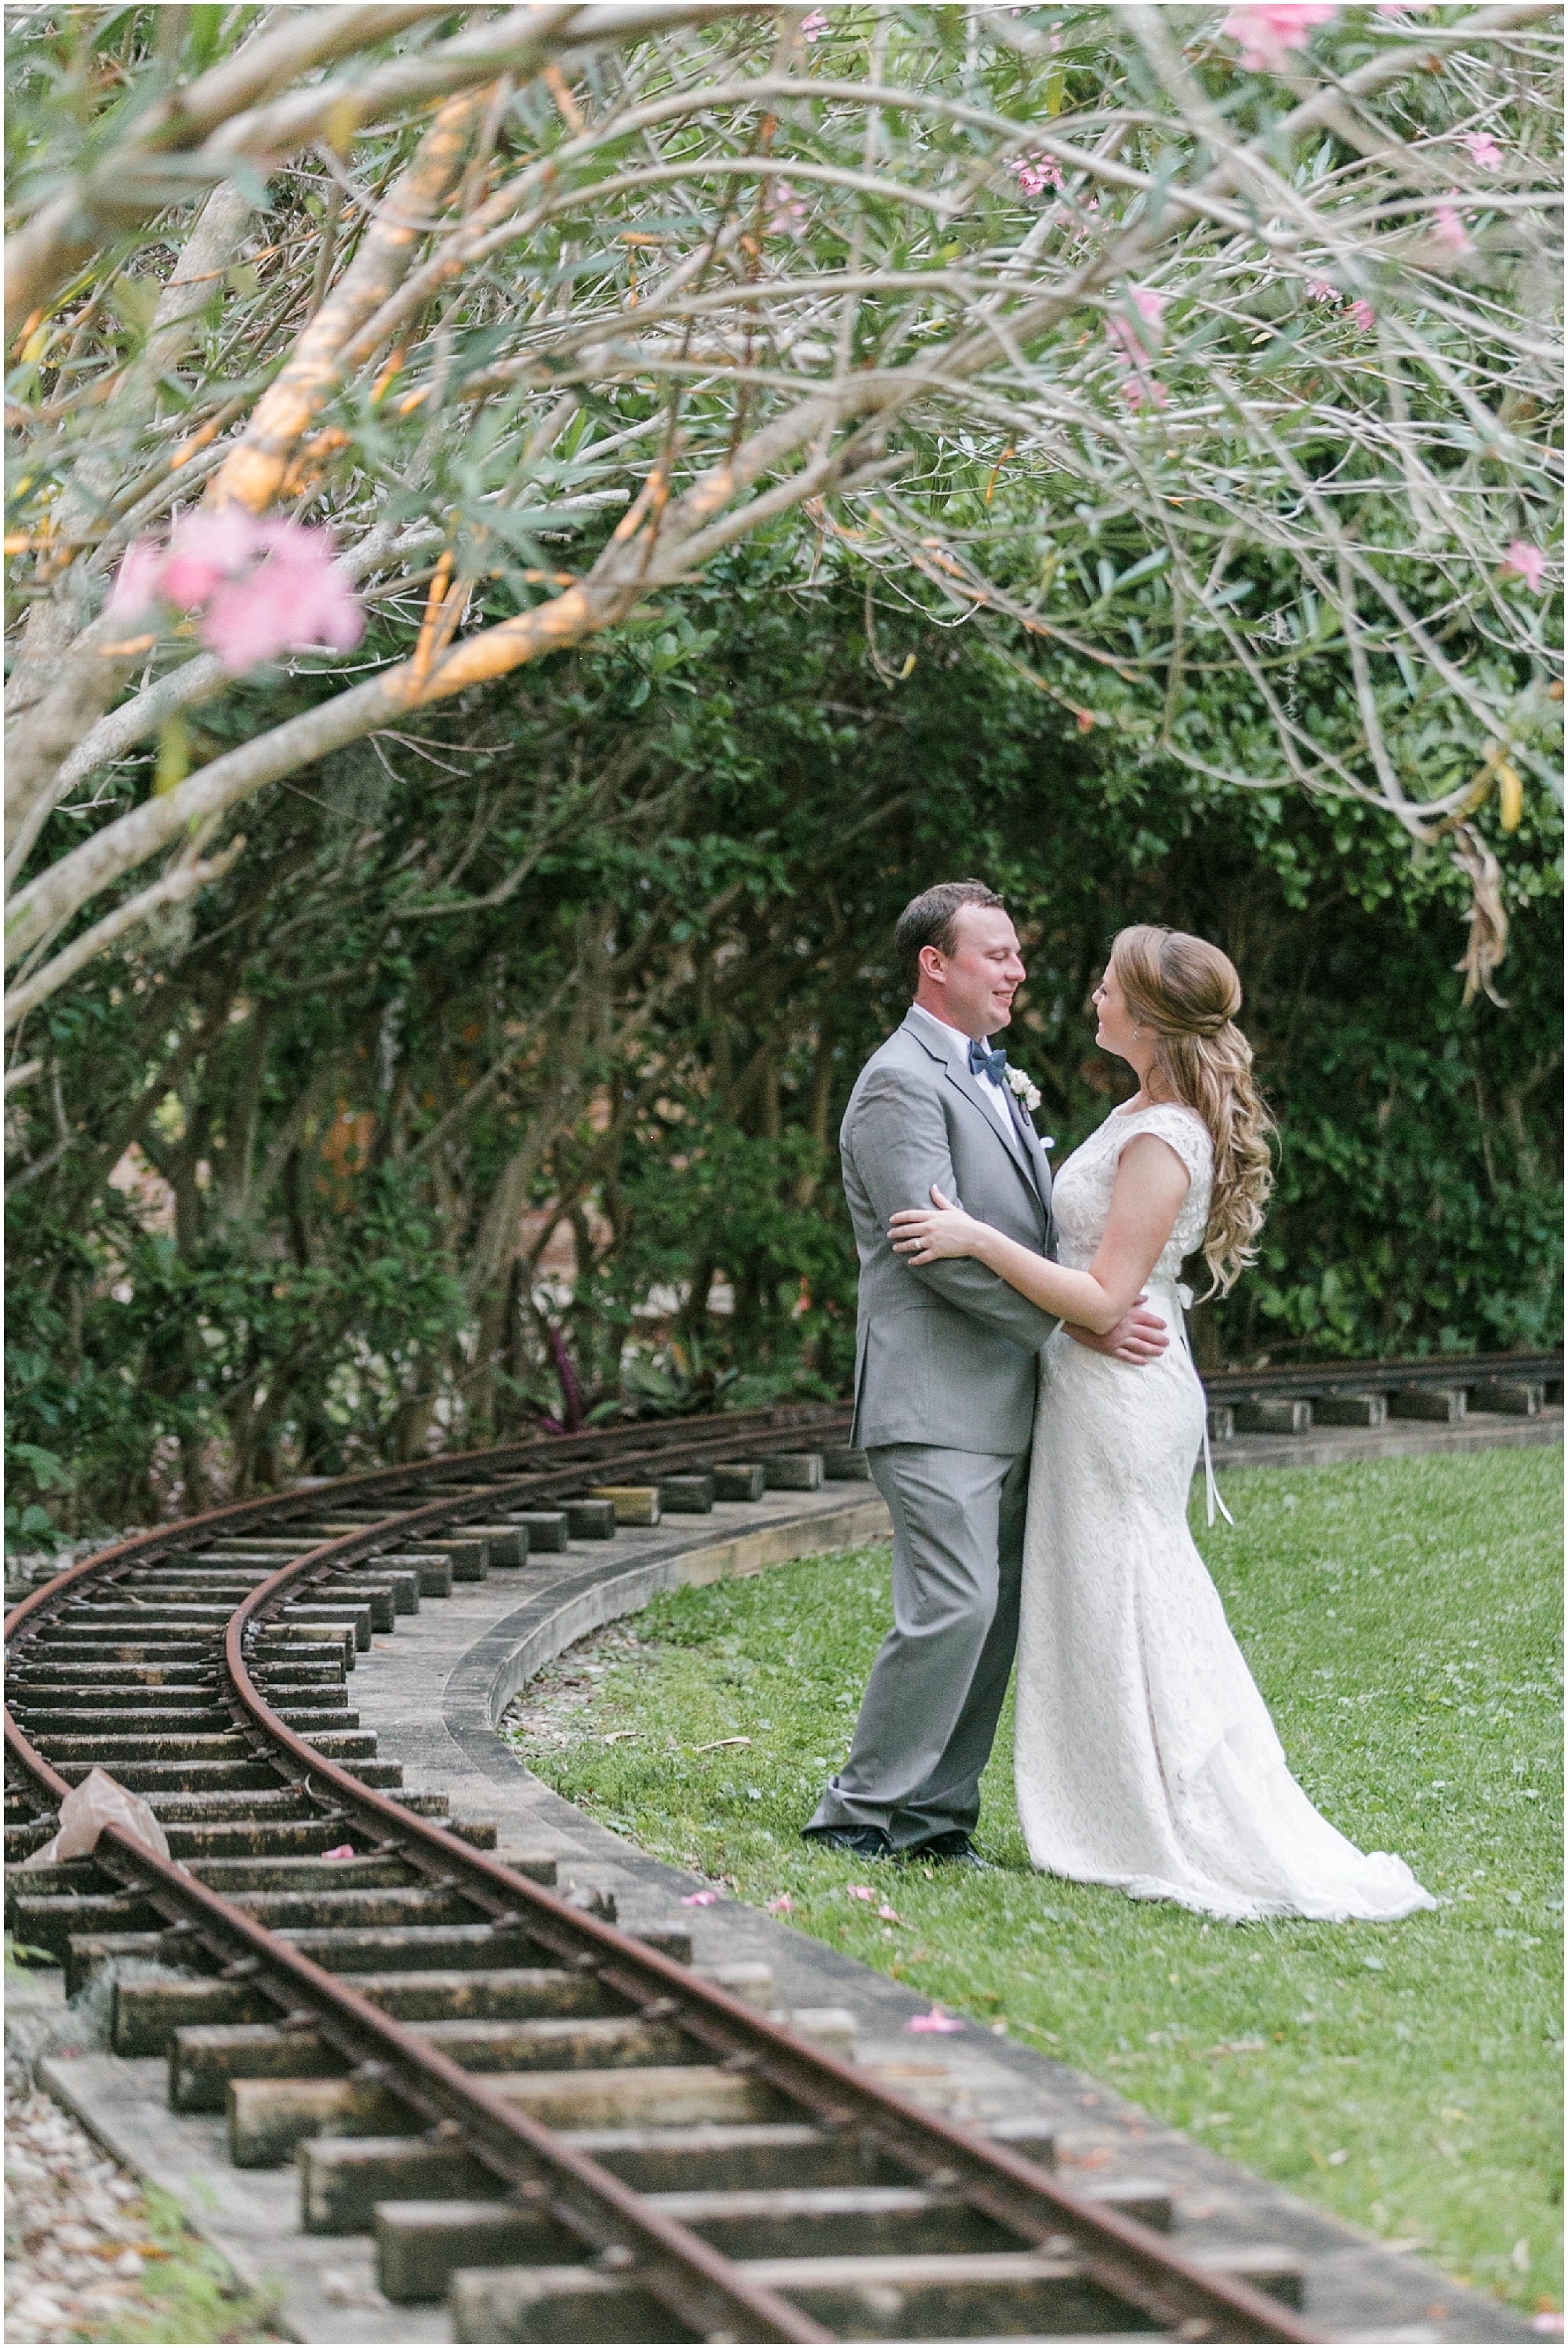 Bride and groom holding each other and looking into each other's eyes while standing next to a railroad.